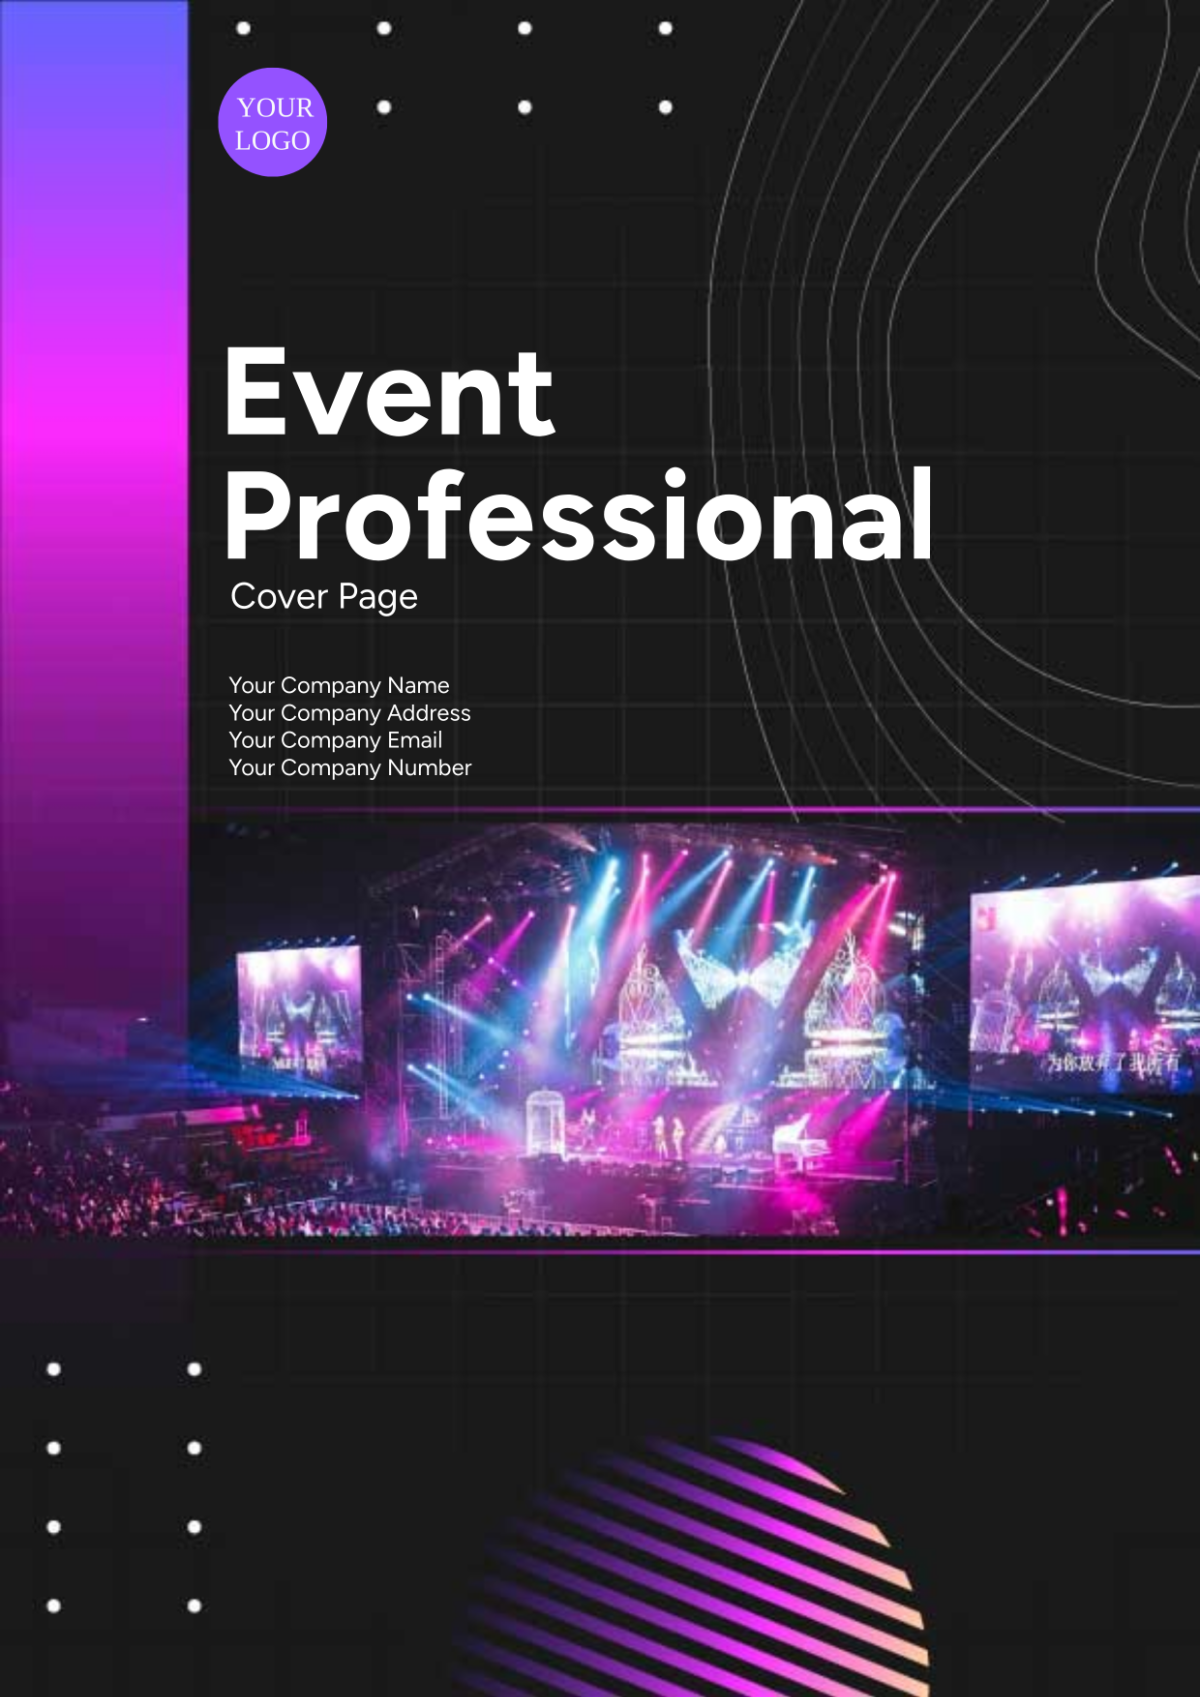 Event Professional Cover Page